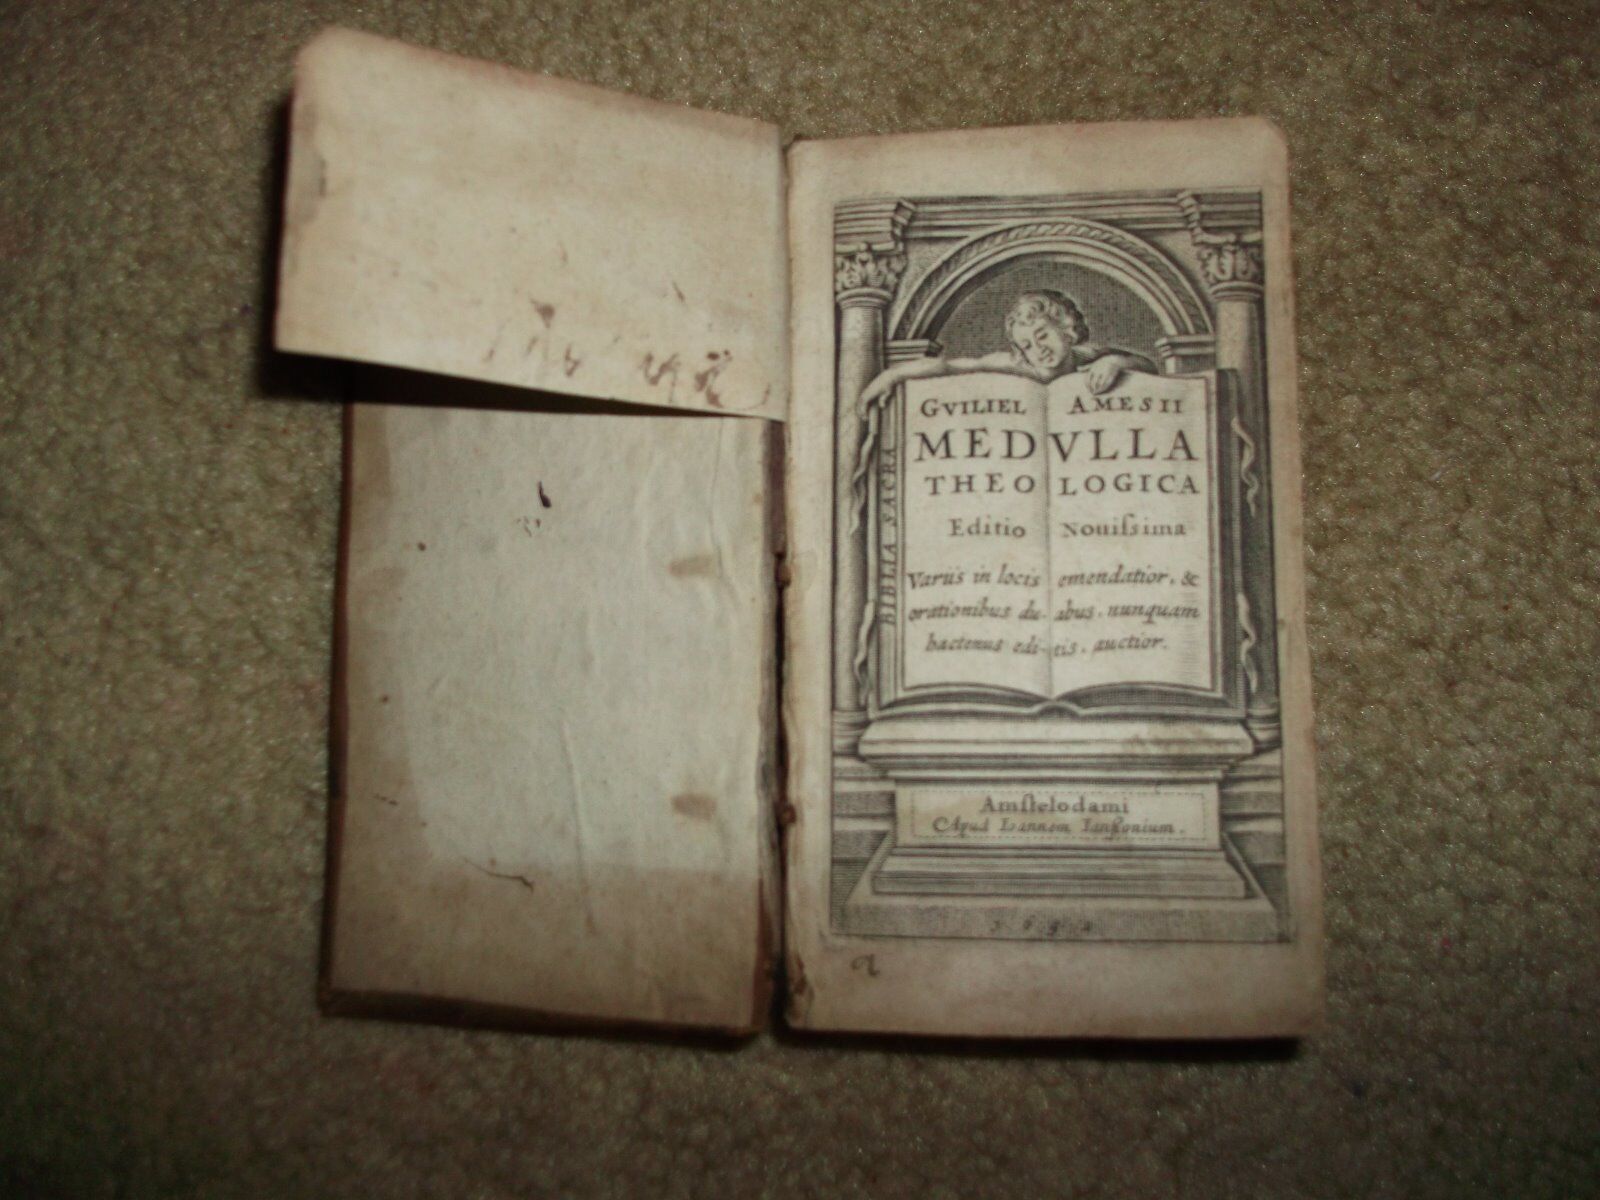 RARE BOOK  FROM 1651